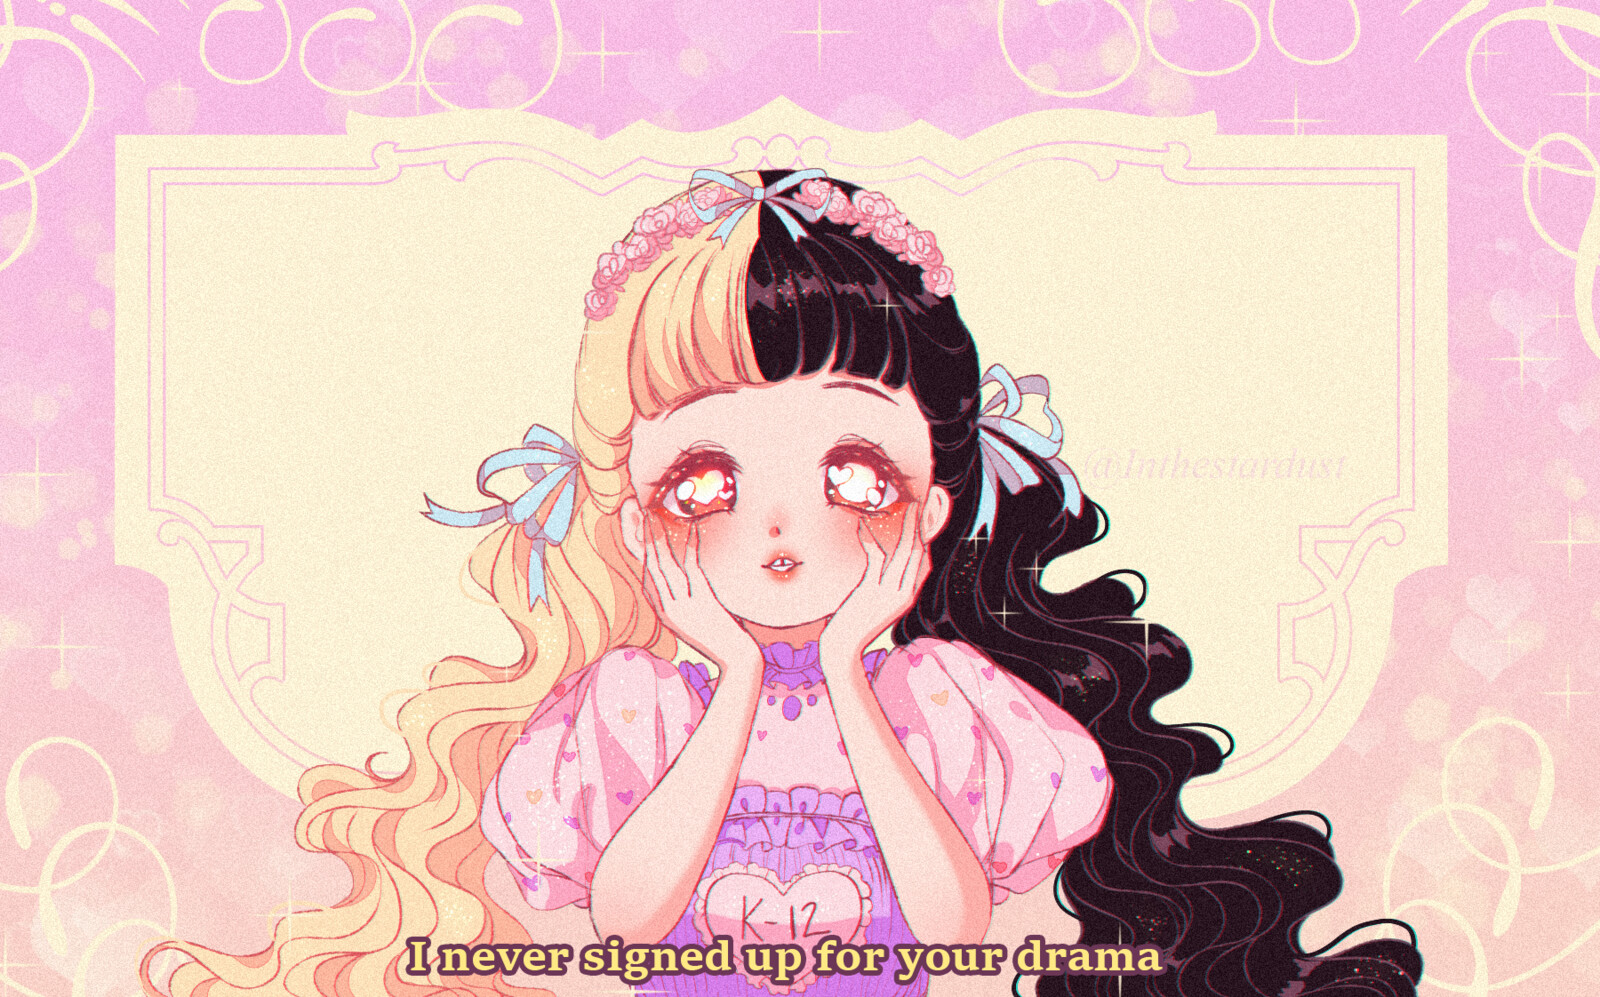 Fan-art of gorgeous Melanie Martinez and her new album made in 90's an...